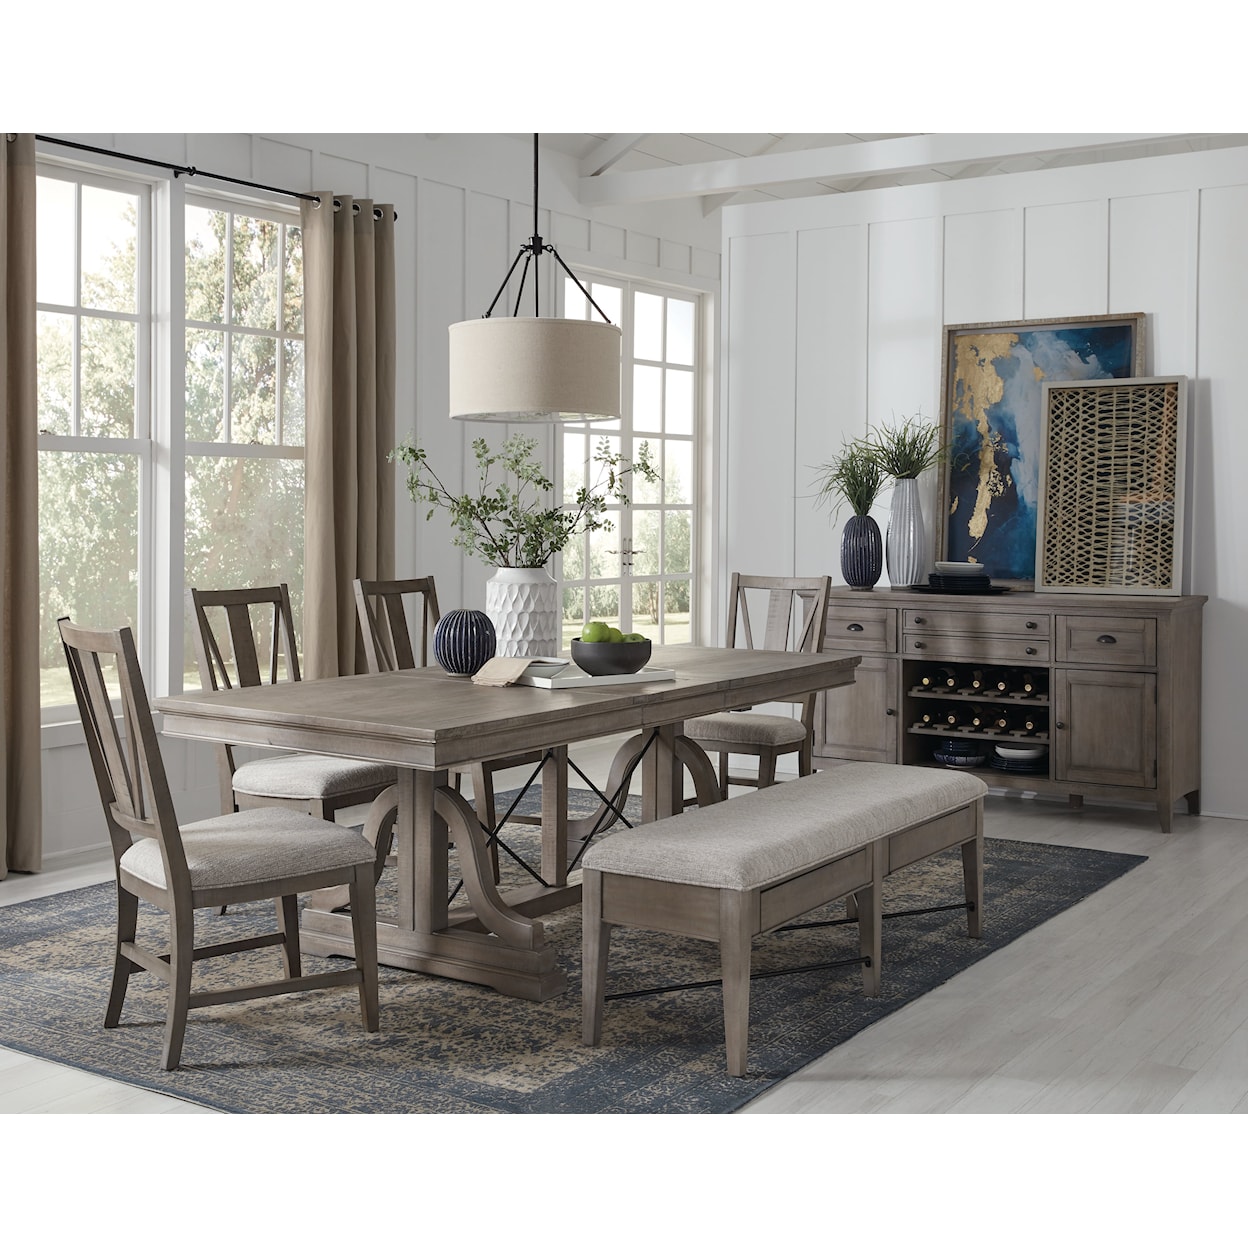 Magnussen Home Paxton Place Dining 6-Piece Dining Set